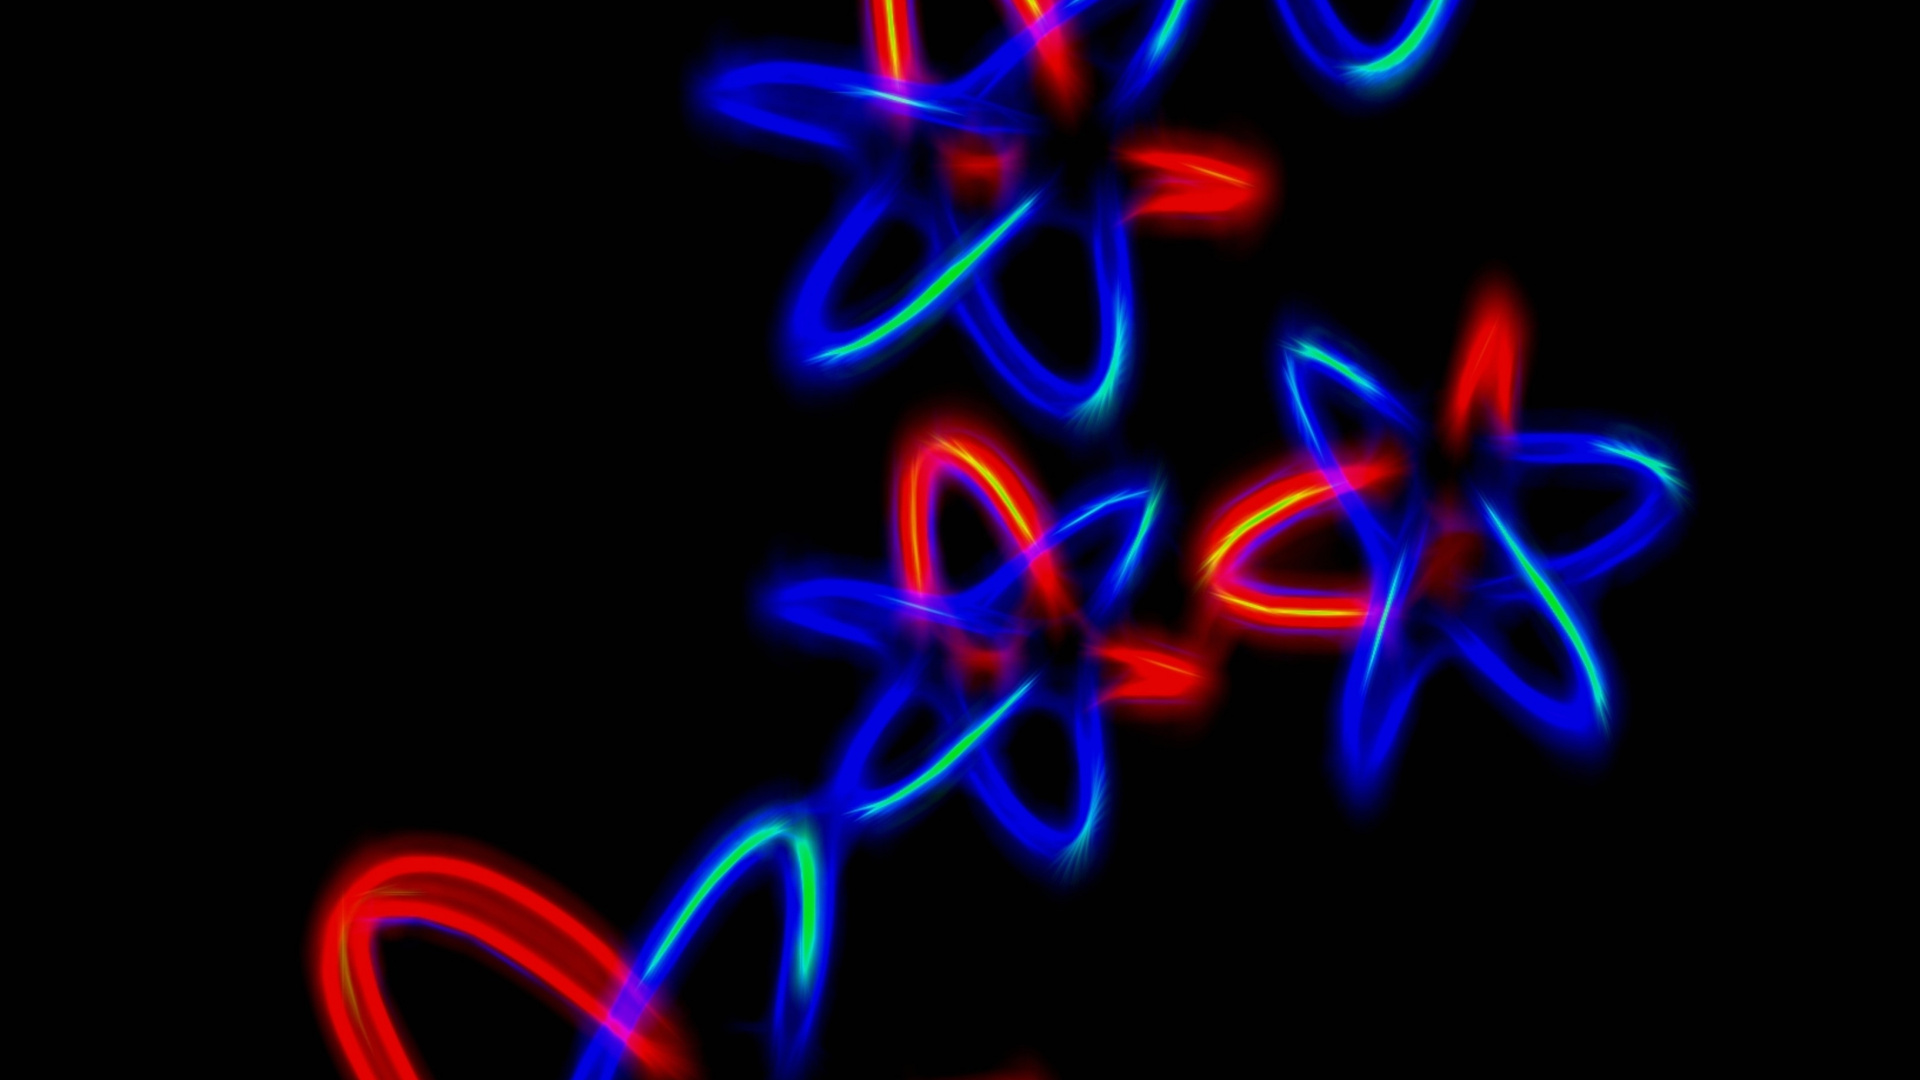 Red Blue and Yellow Abstract Illustration. Wallpaper in 1920x1080 Resolution